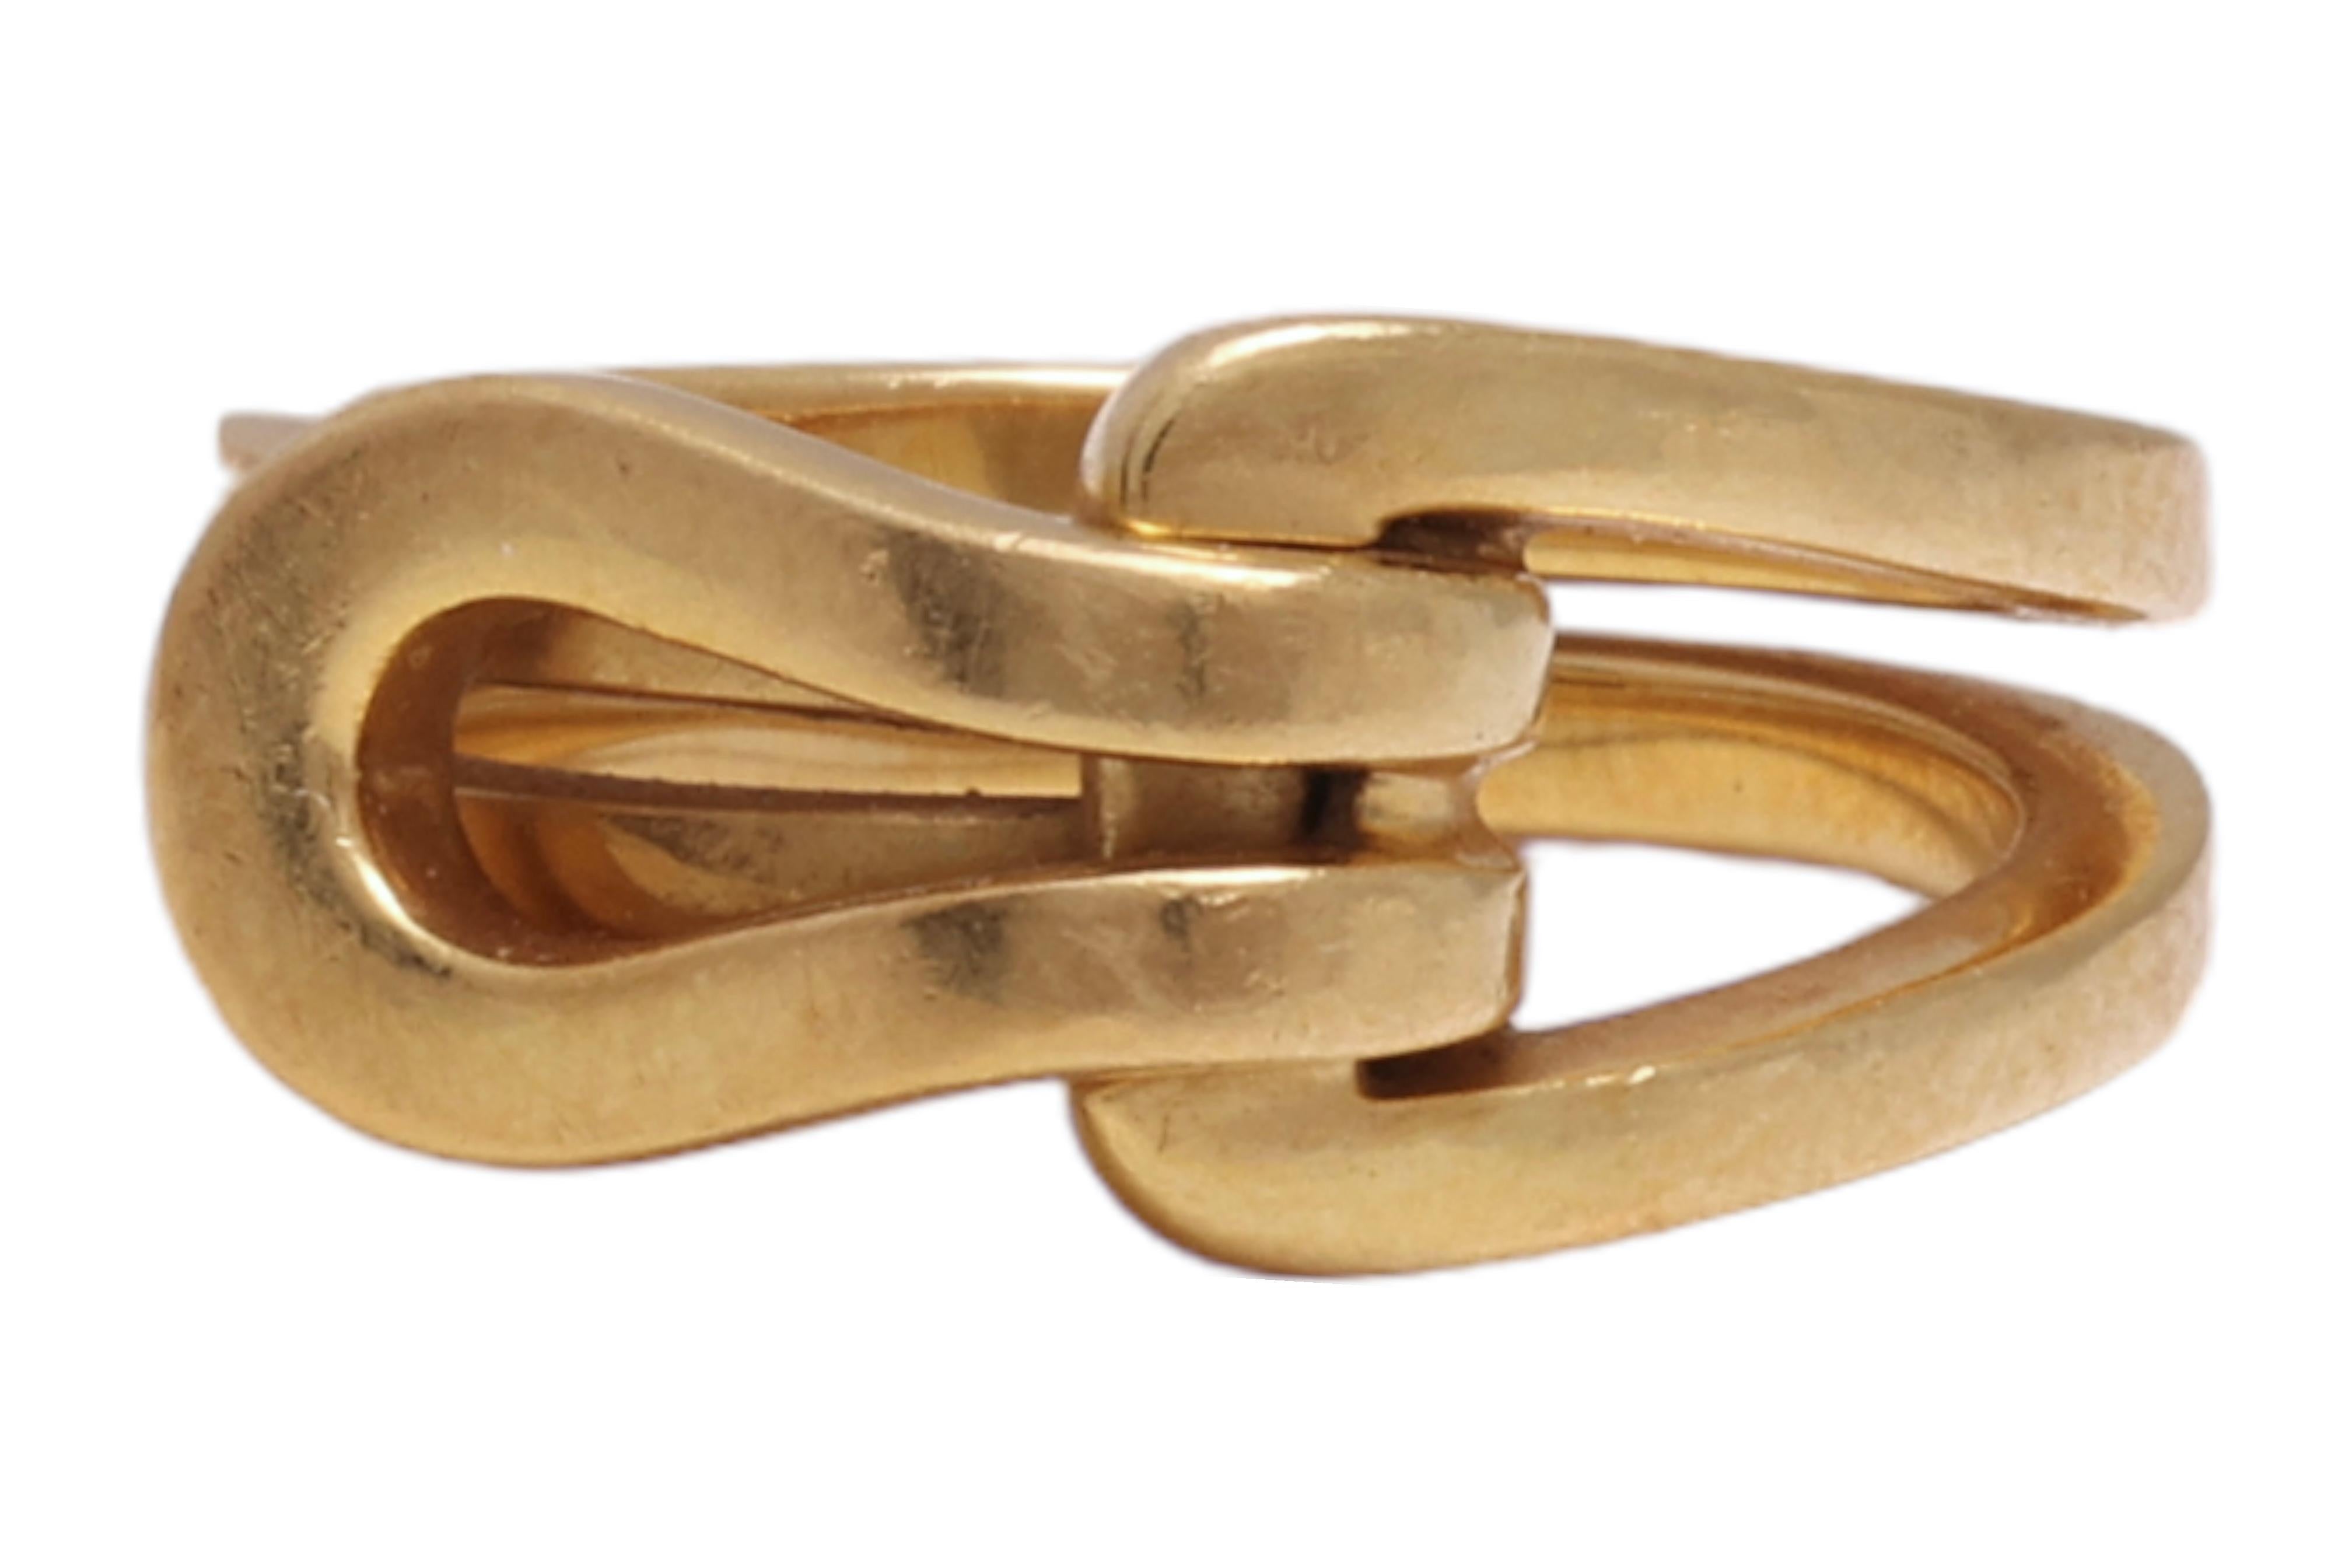 18 kt. Yellow Gold Tom Ford Interlocked  Ring, Comes in the original Tom Ford Box

Ring:
Material: 18 kt. Yellow gold
Ring size: 48.5 EU / 4.75 US ( can be adjusted for free)
Total weight: 8.8 gram / 0.310 oz / 5.6 dwt

Possibility to buy matching